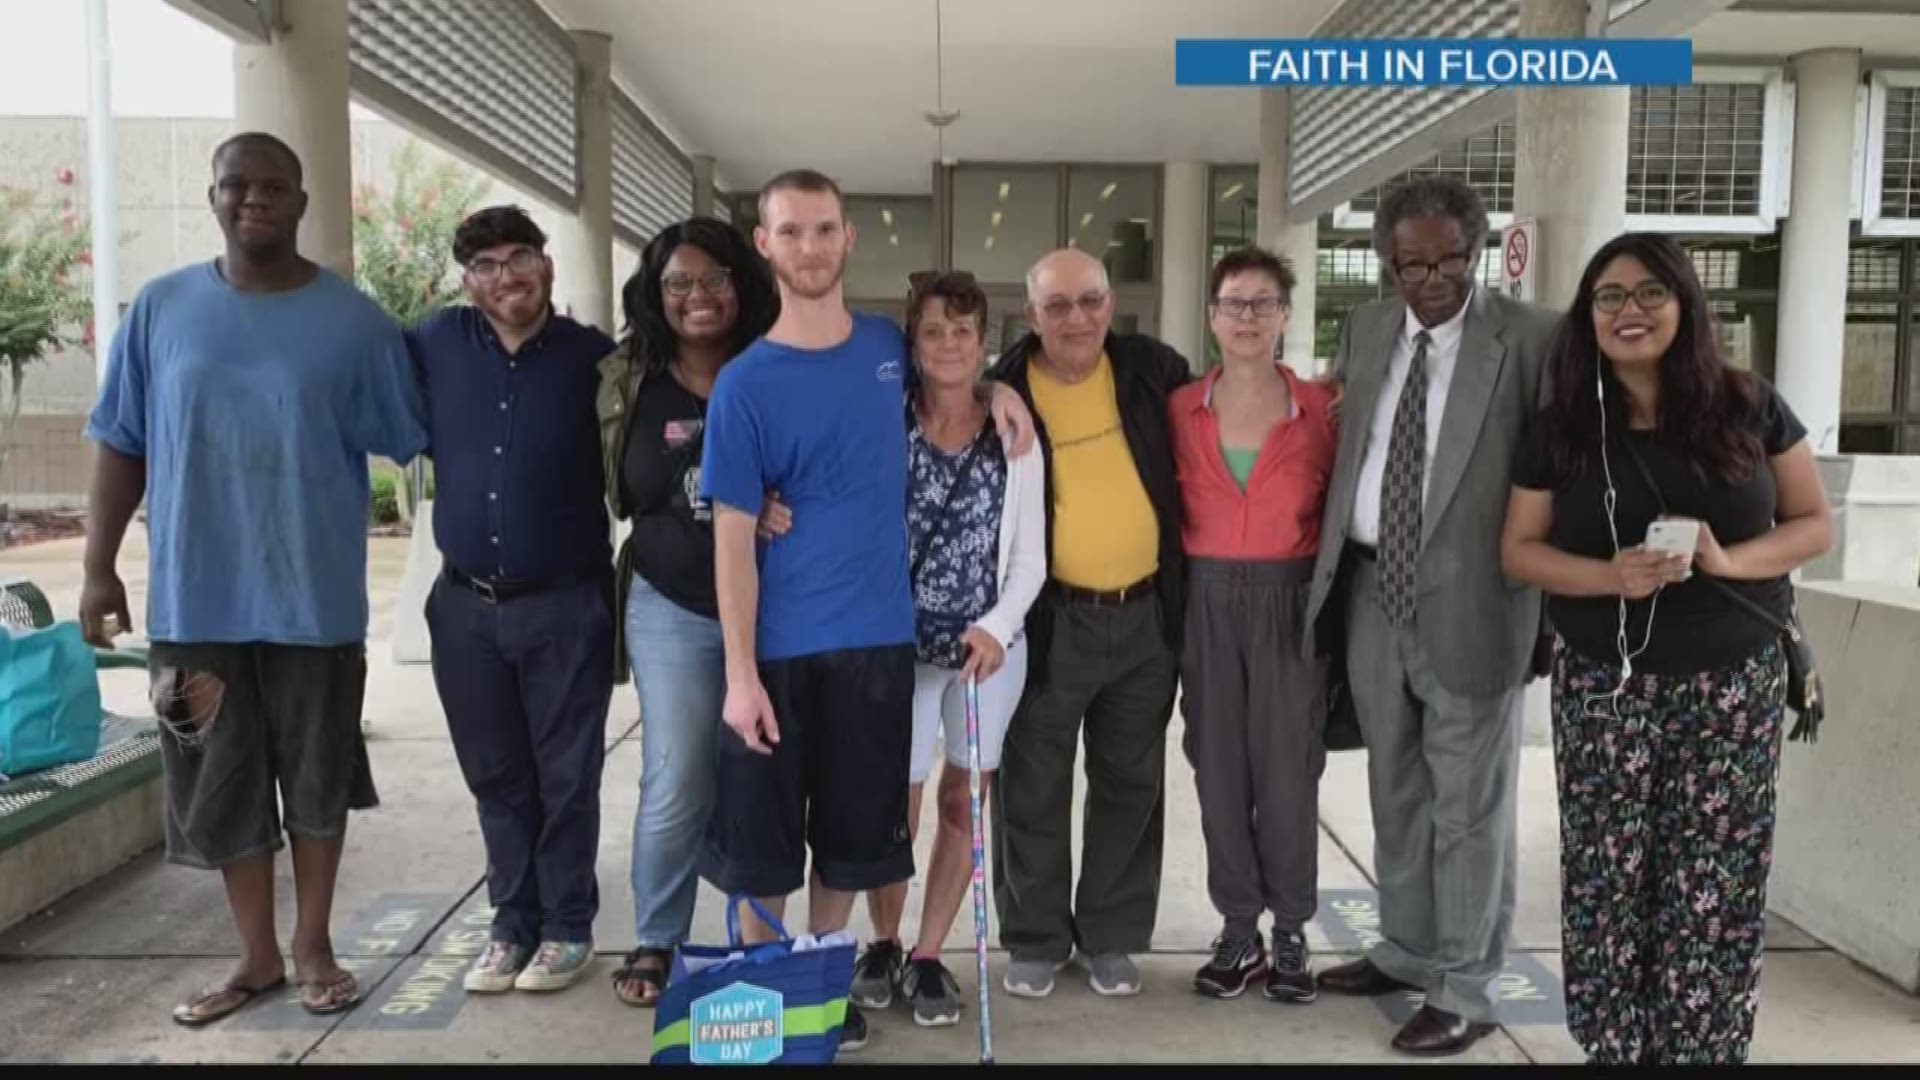 This Father's Day was extra special for a man in Hillsborough County, who thought he wouldn't get to see his kid this holiday.

He was in jail for a non-violent misdemeanor crime and was unable to make his $250 bail.

The group Faith in Florida surprised him and paid it for him. They posted bail for two other men as well.